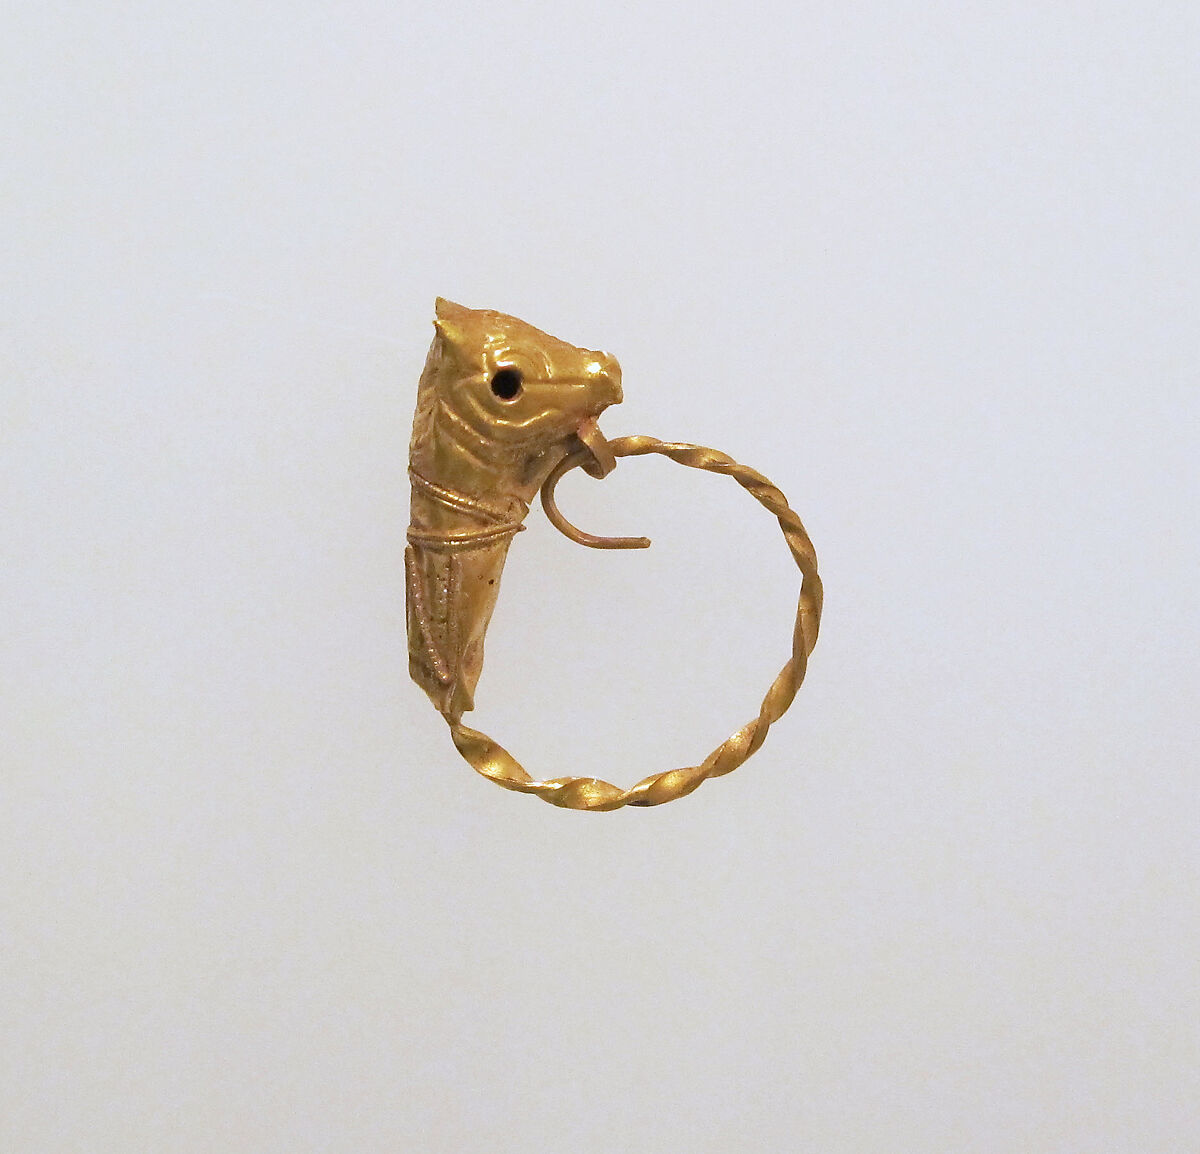 Gold earring with head of a bull, Gold, Greek 